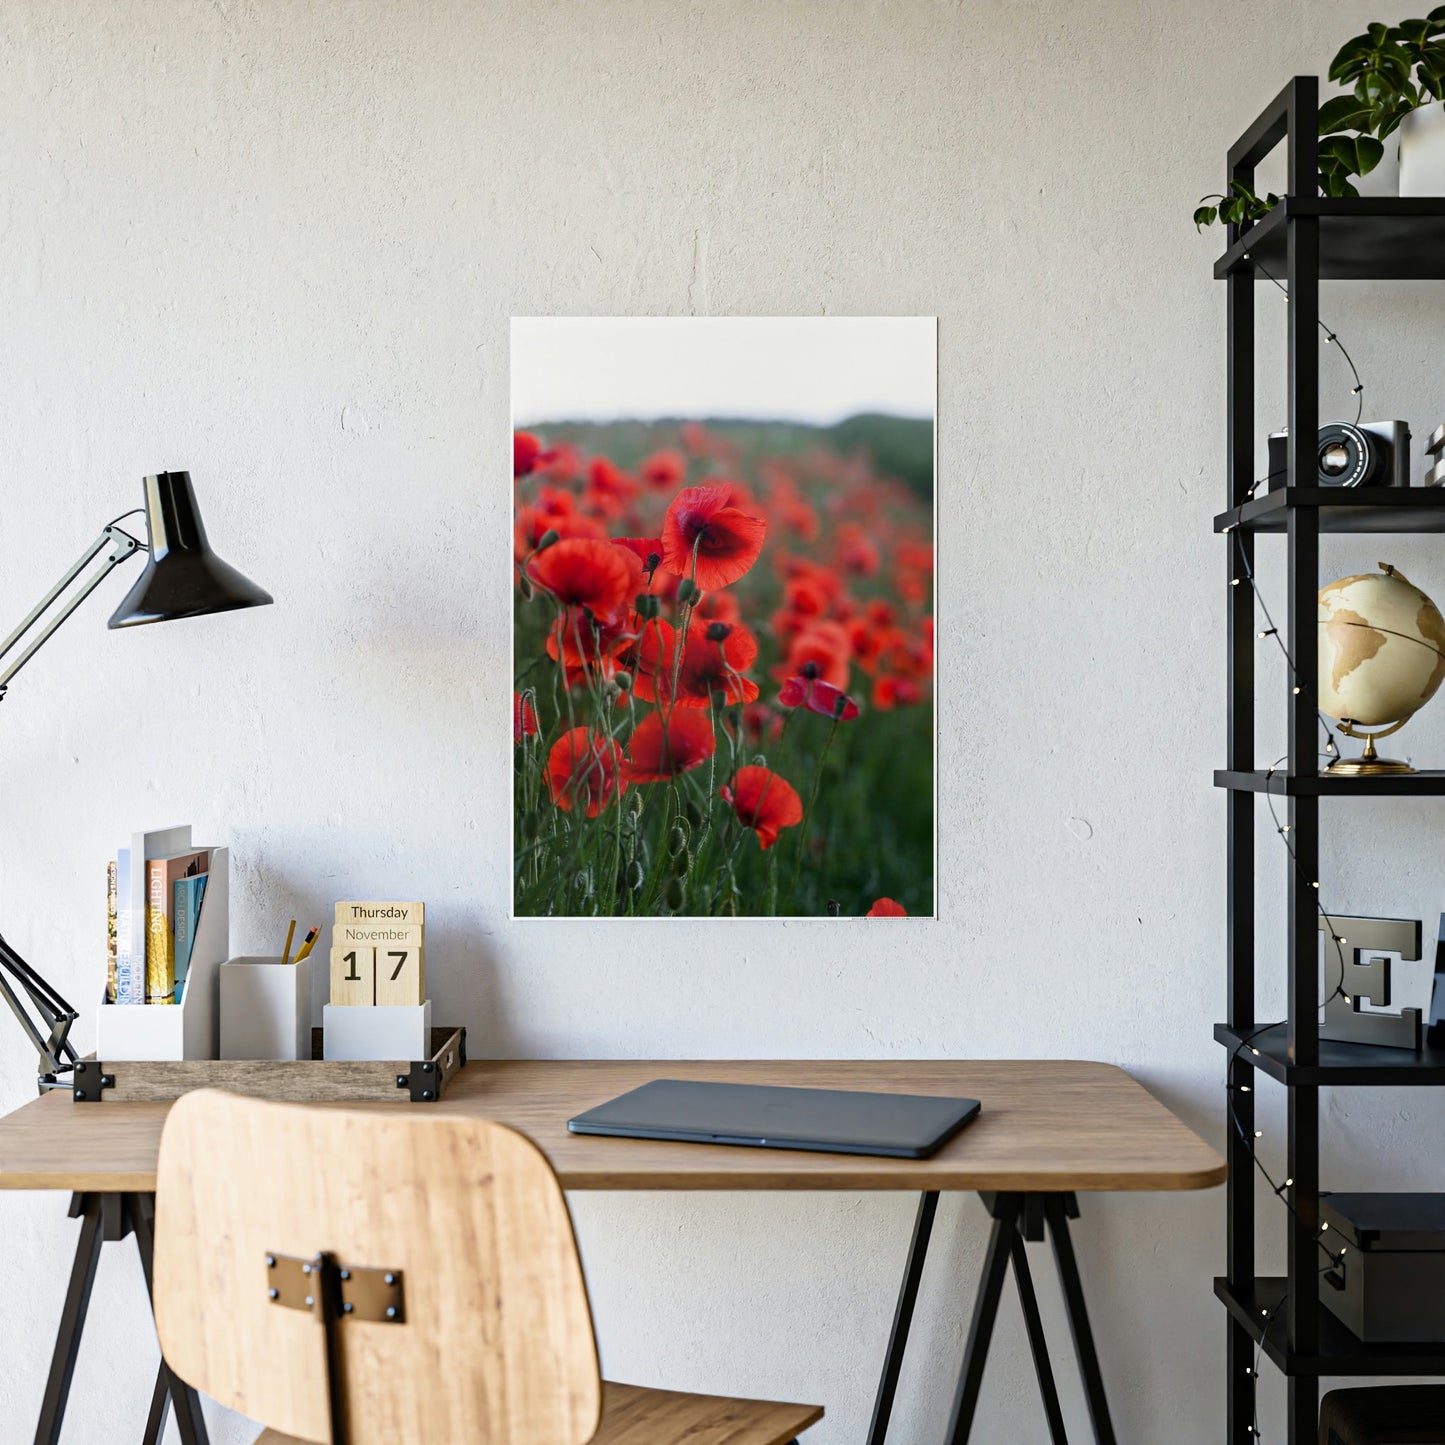 Fields of Red: A Painting of Poppies in Bloom